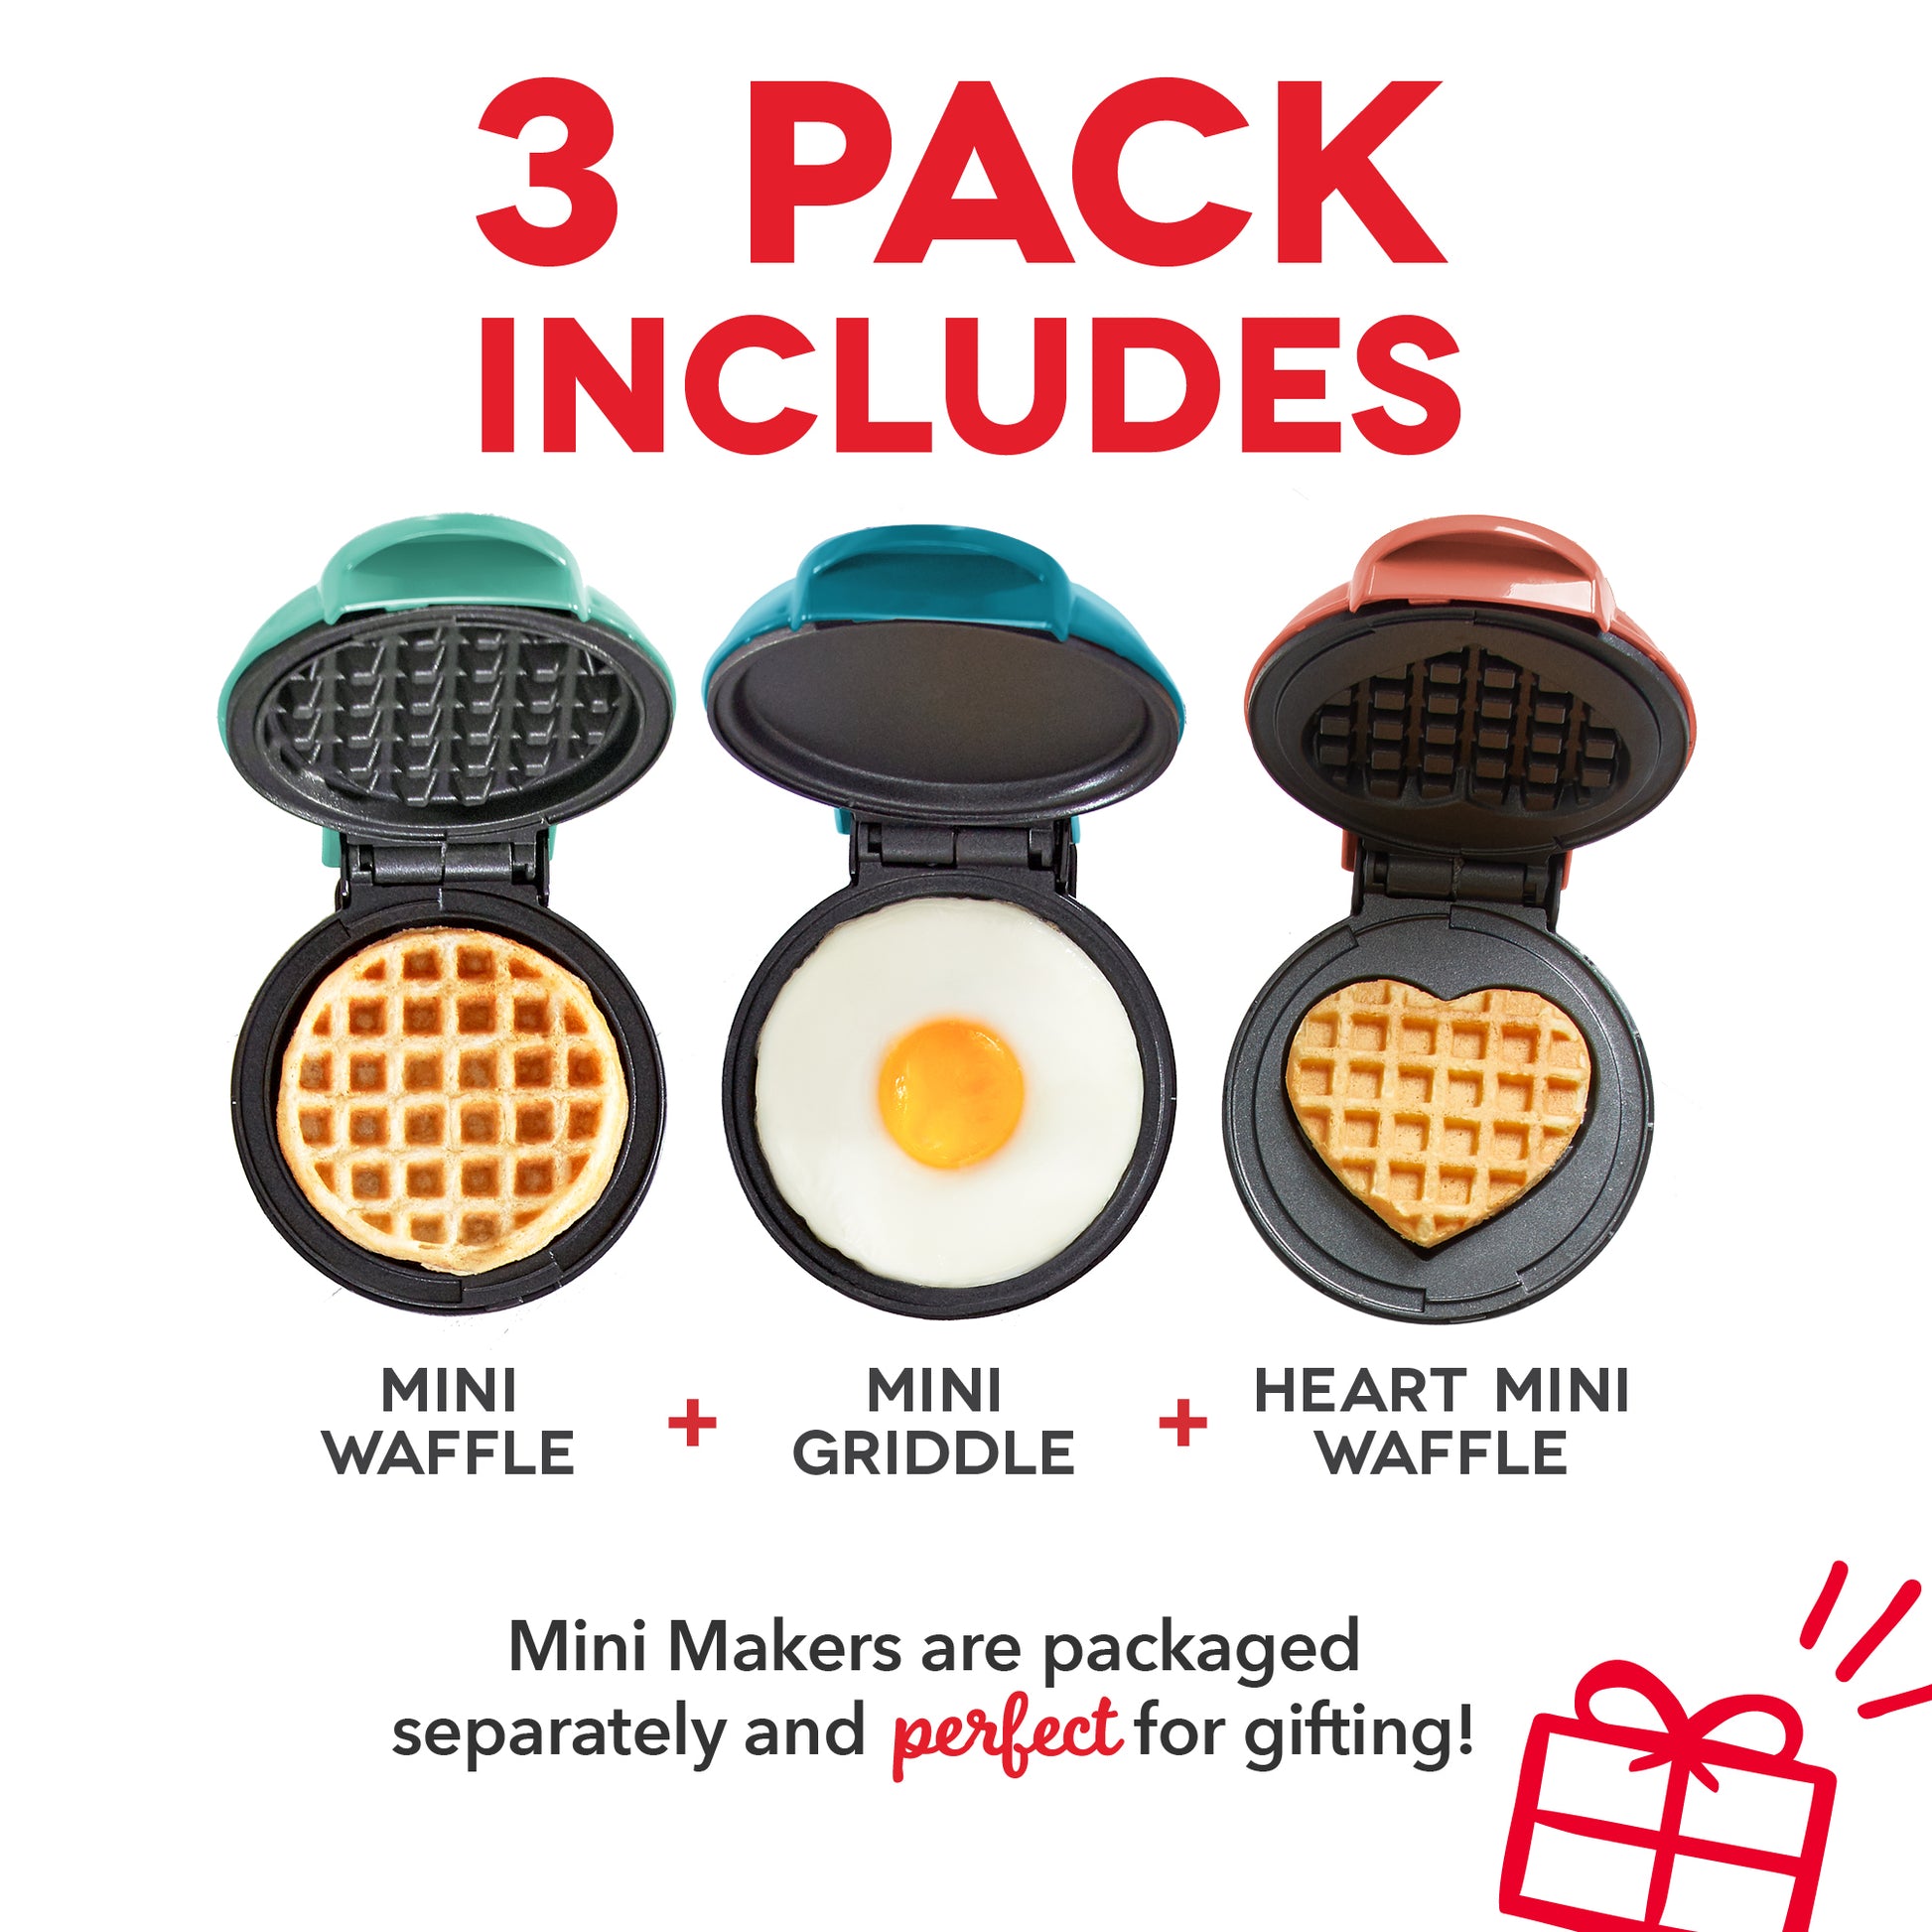 DASH Mini Waffle Maker + Grill + Griddle, 3 in 1 Pack - Red/Aqua